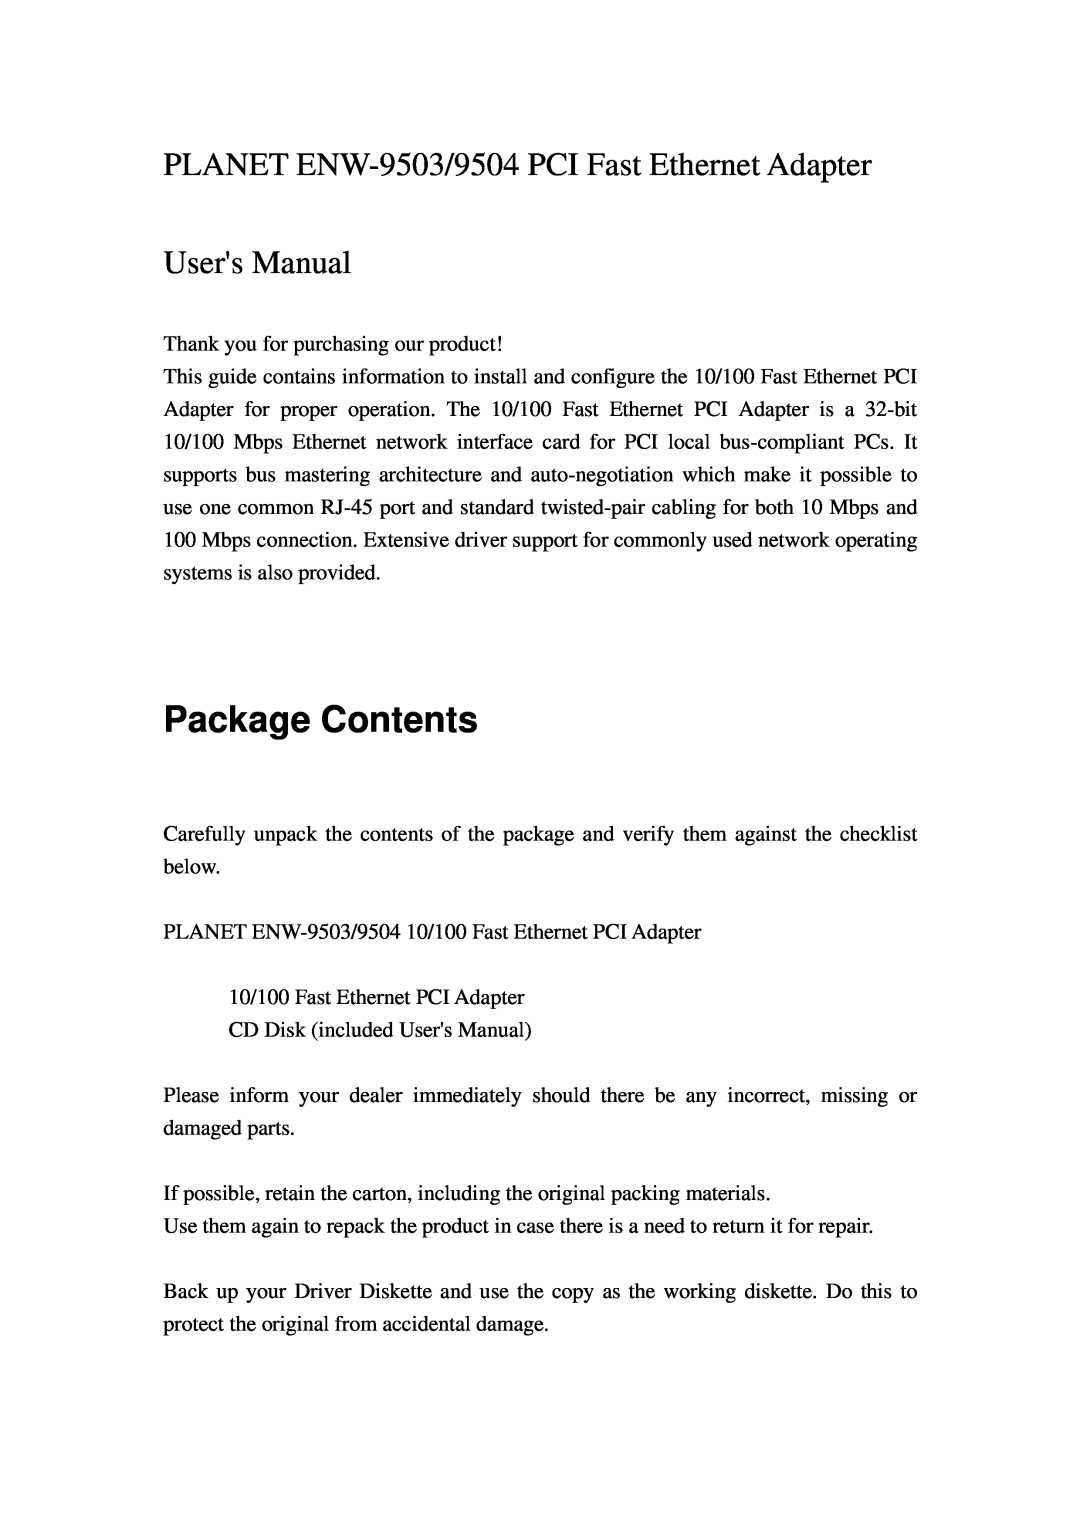 Planet Technology ENW-9504, ENW-9503 user manual Package Contents 